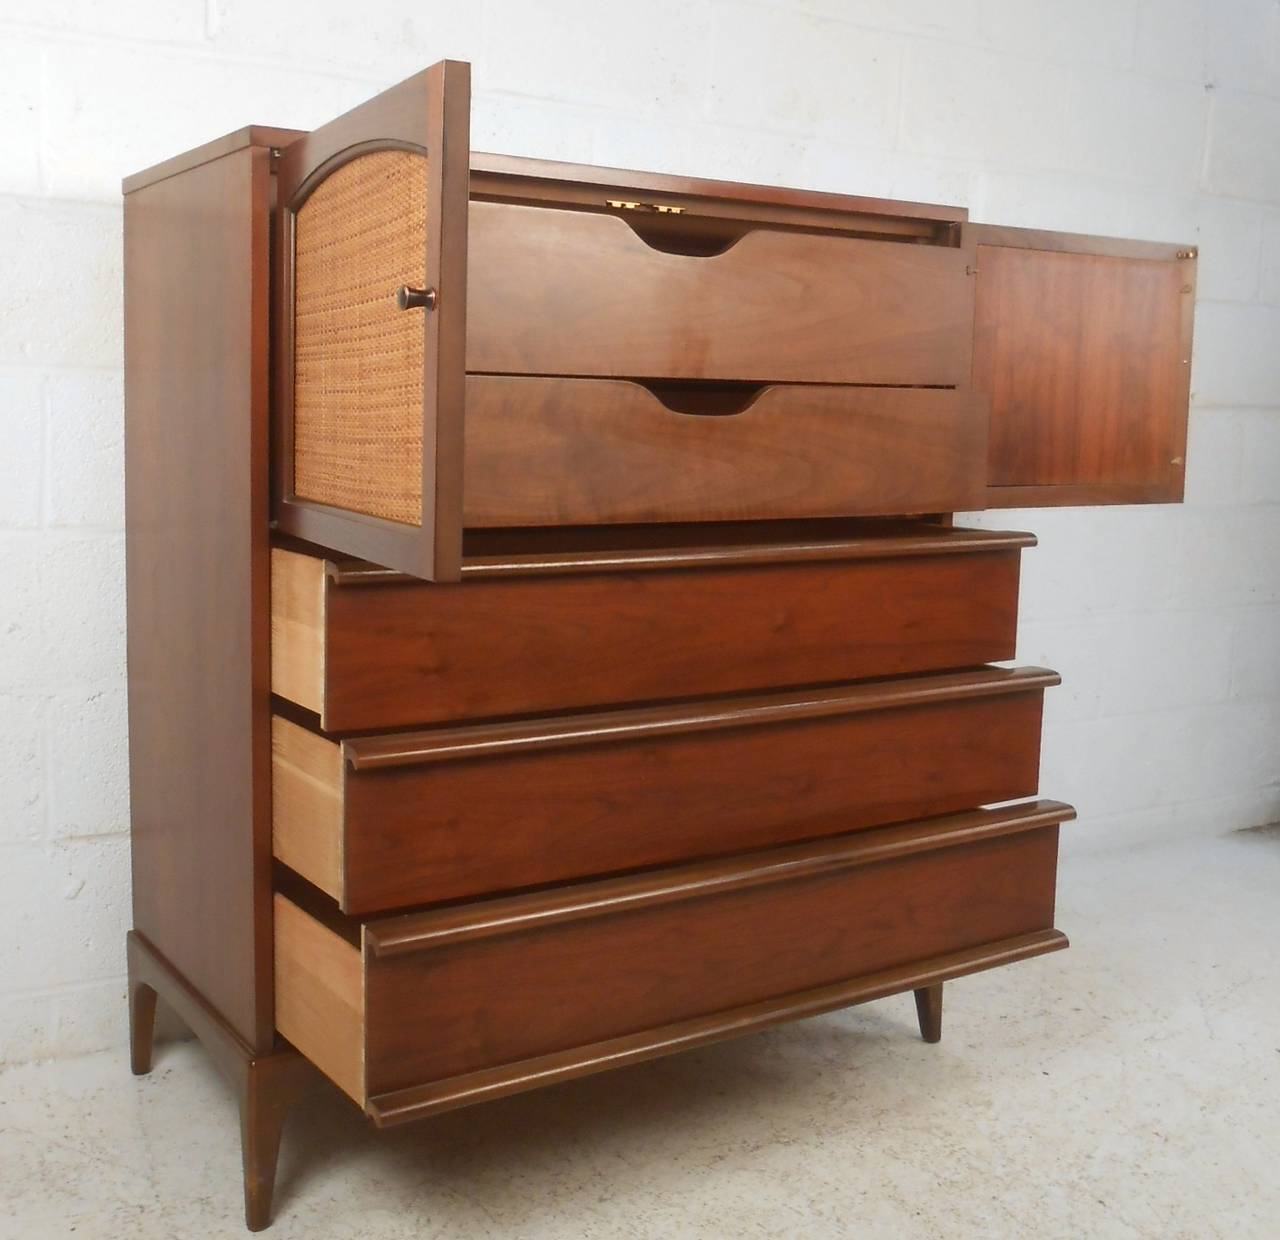 This stylish vintage highboy dresser offers five drawers for storage in any room. Wonderful walnut finish contrasts nicely with cane front upper cabinet, while carved drawer pulls and tapered legs perfectly accent it's mid-century style. Please